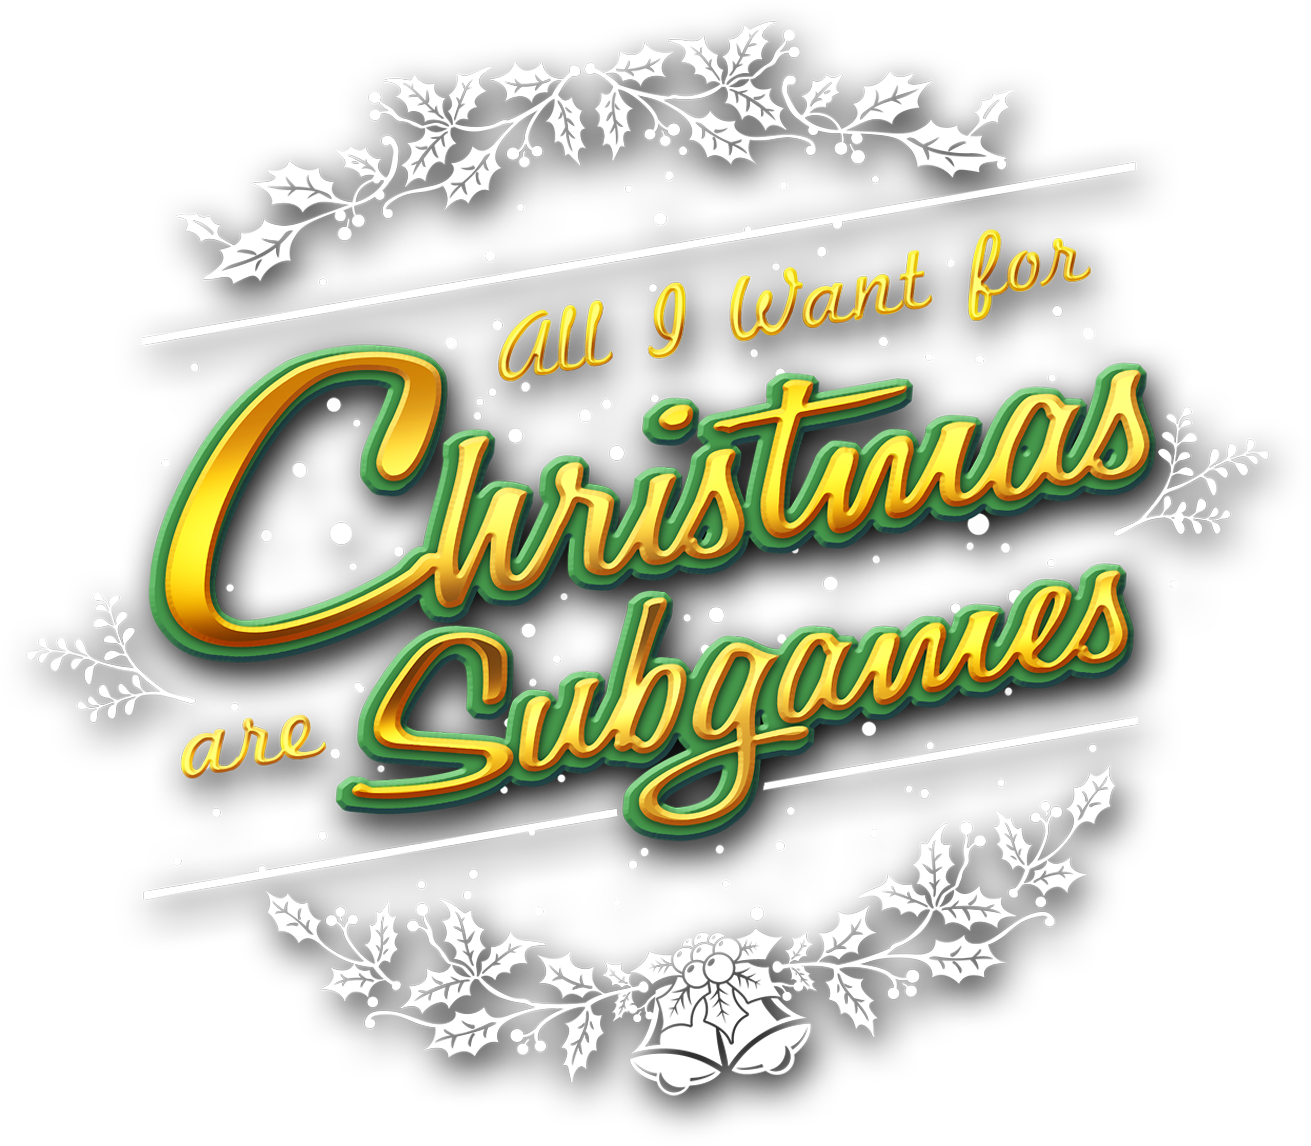 All I want for Christmas are Subgames